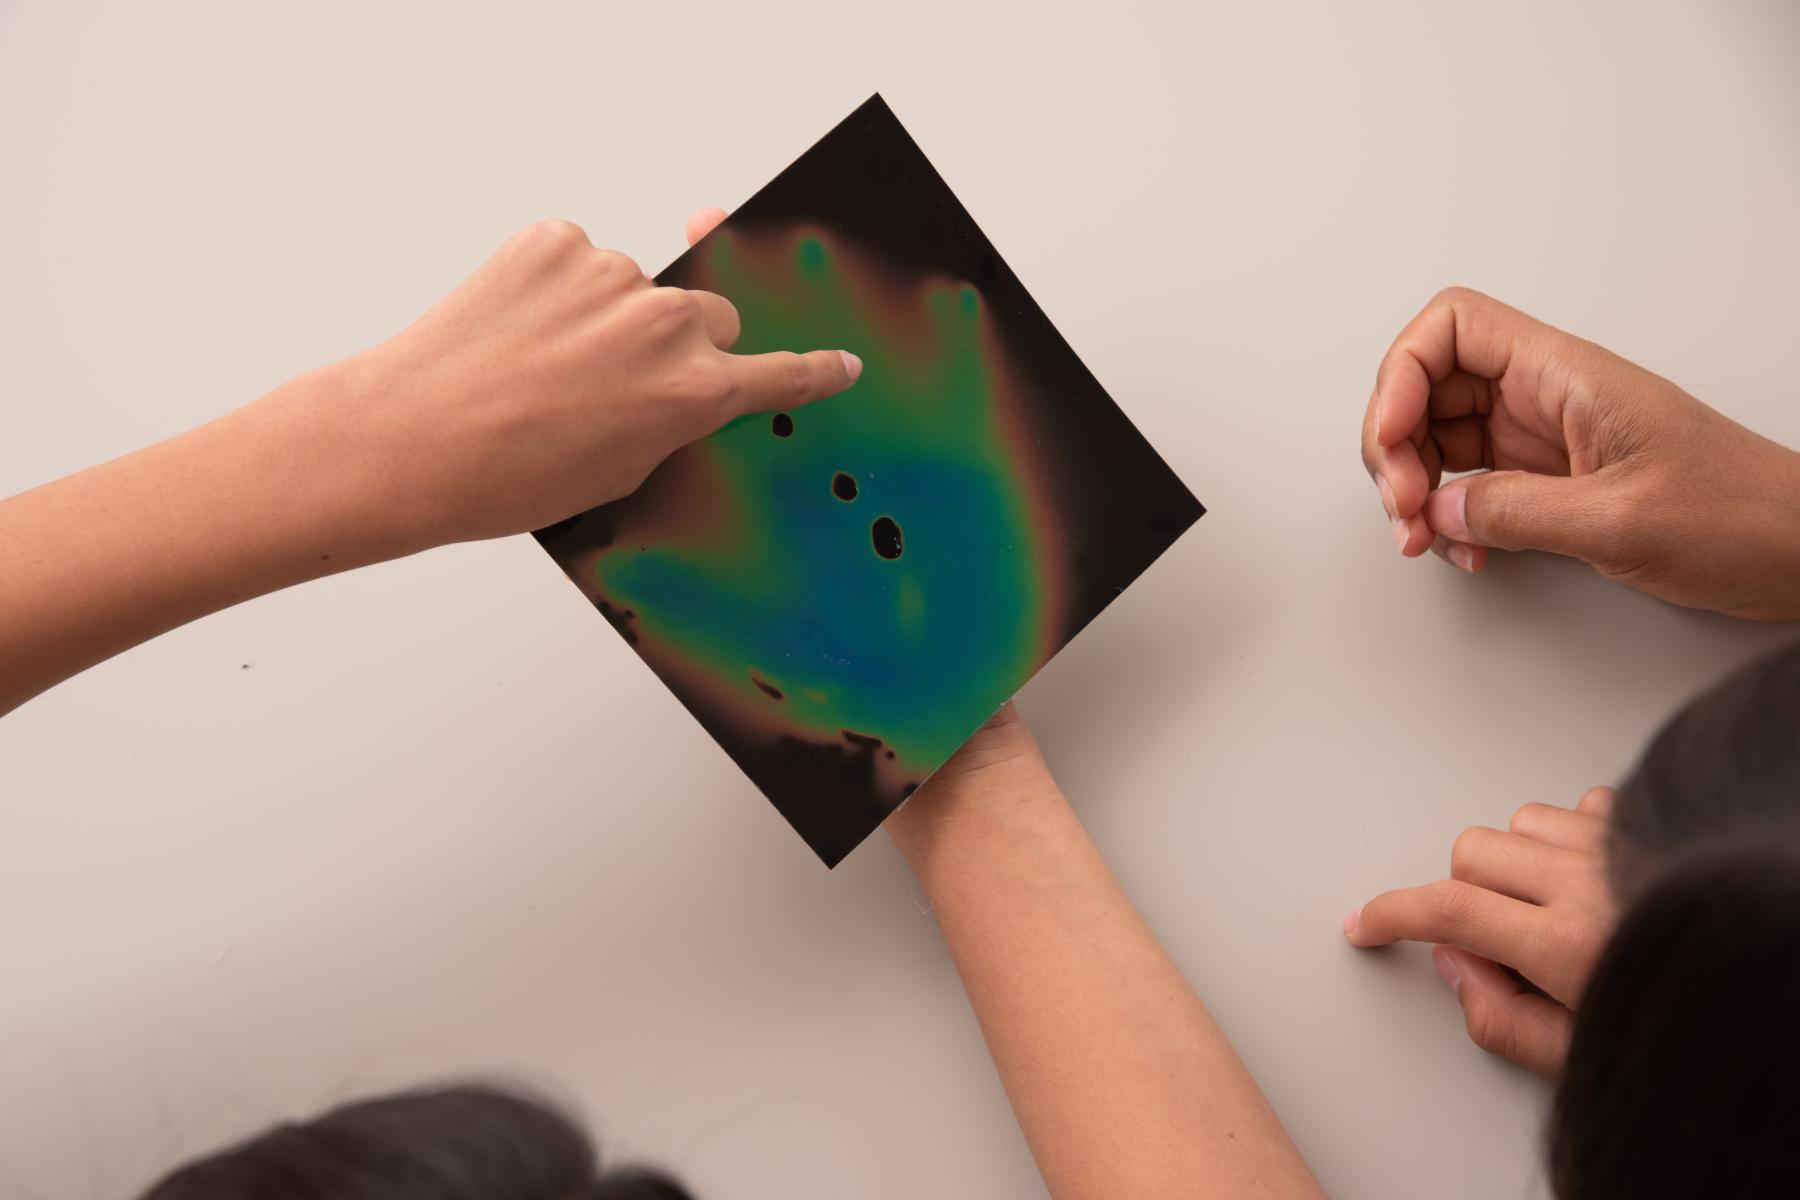 Heat sensitive film showing the outline of the hand of a learner playing with the material